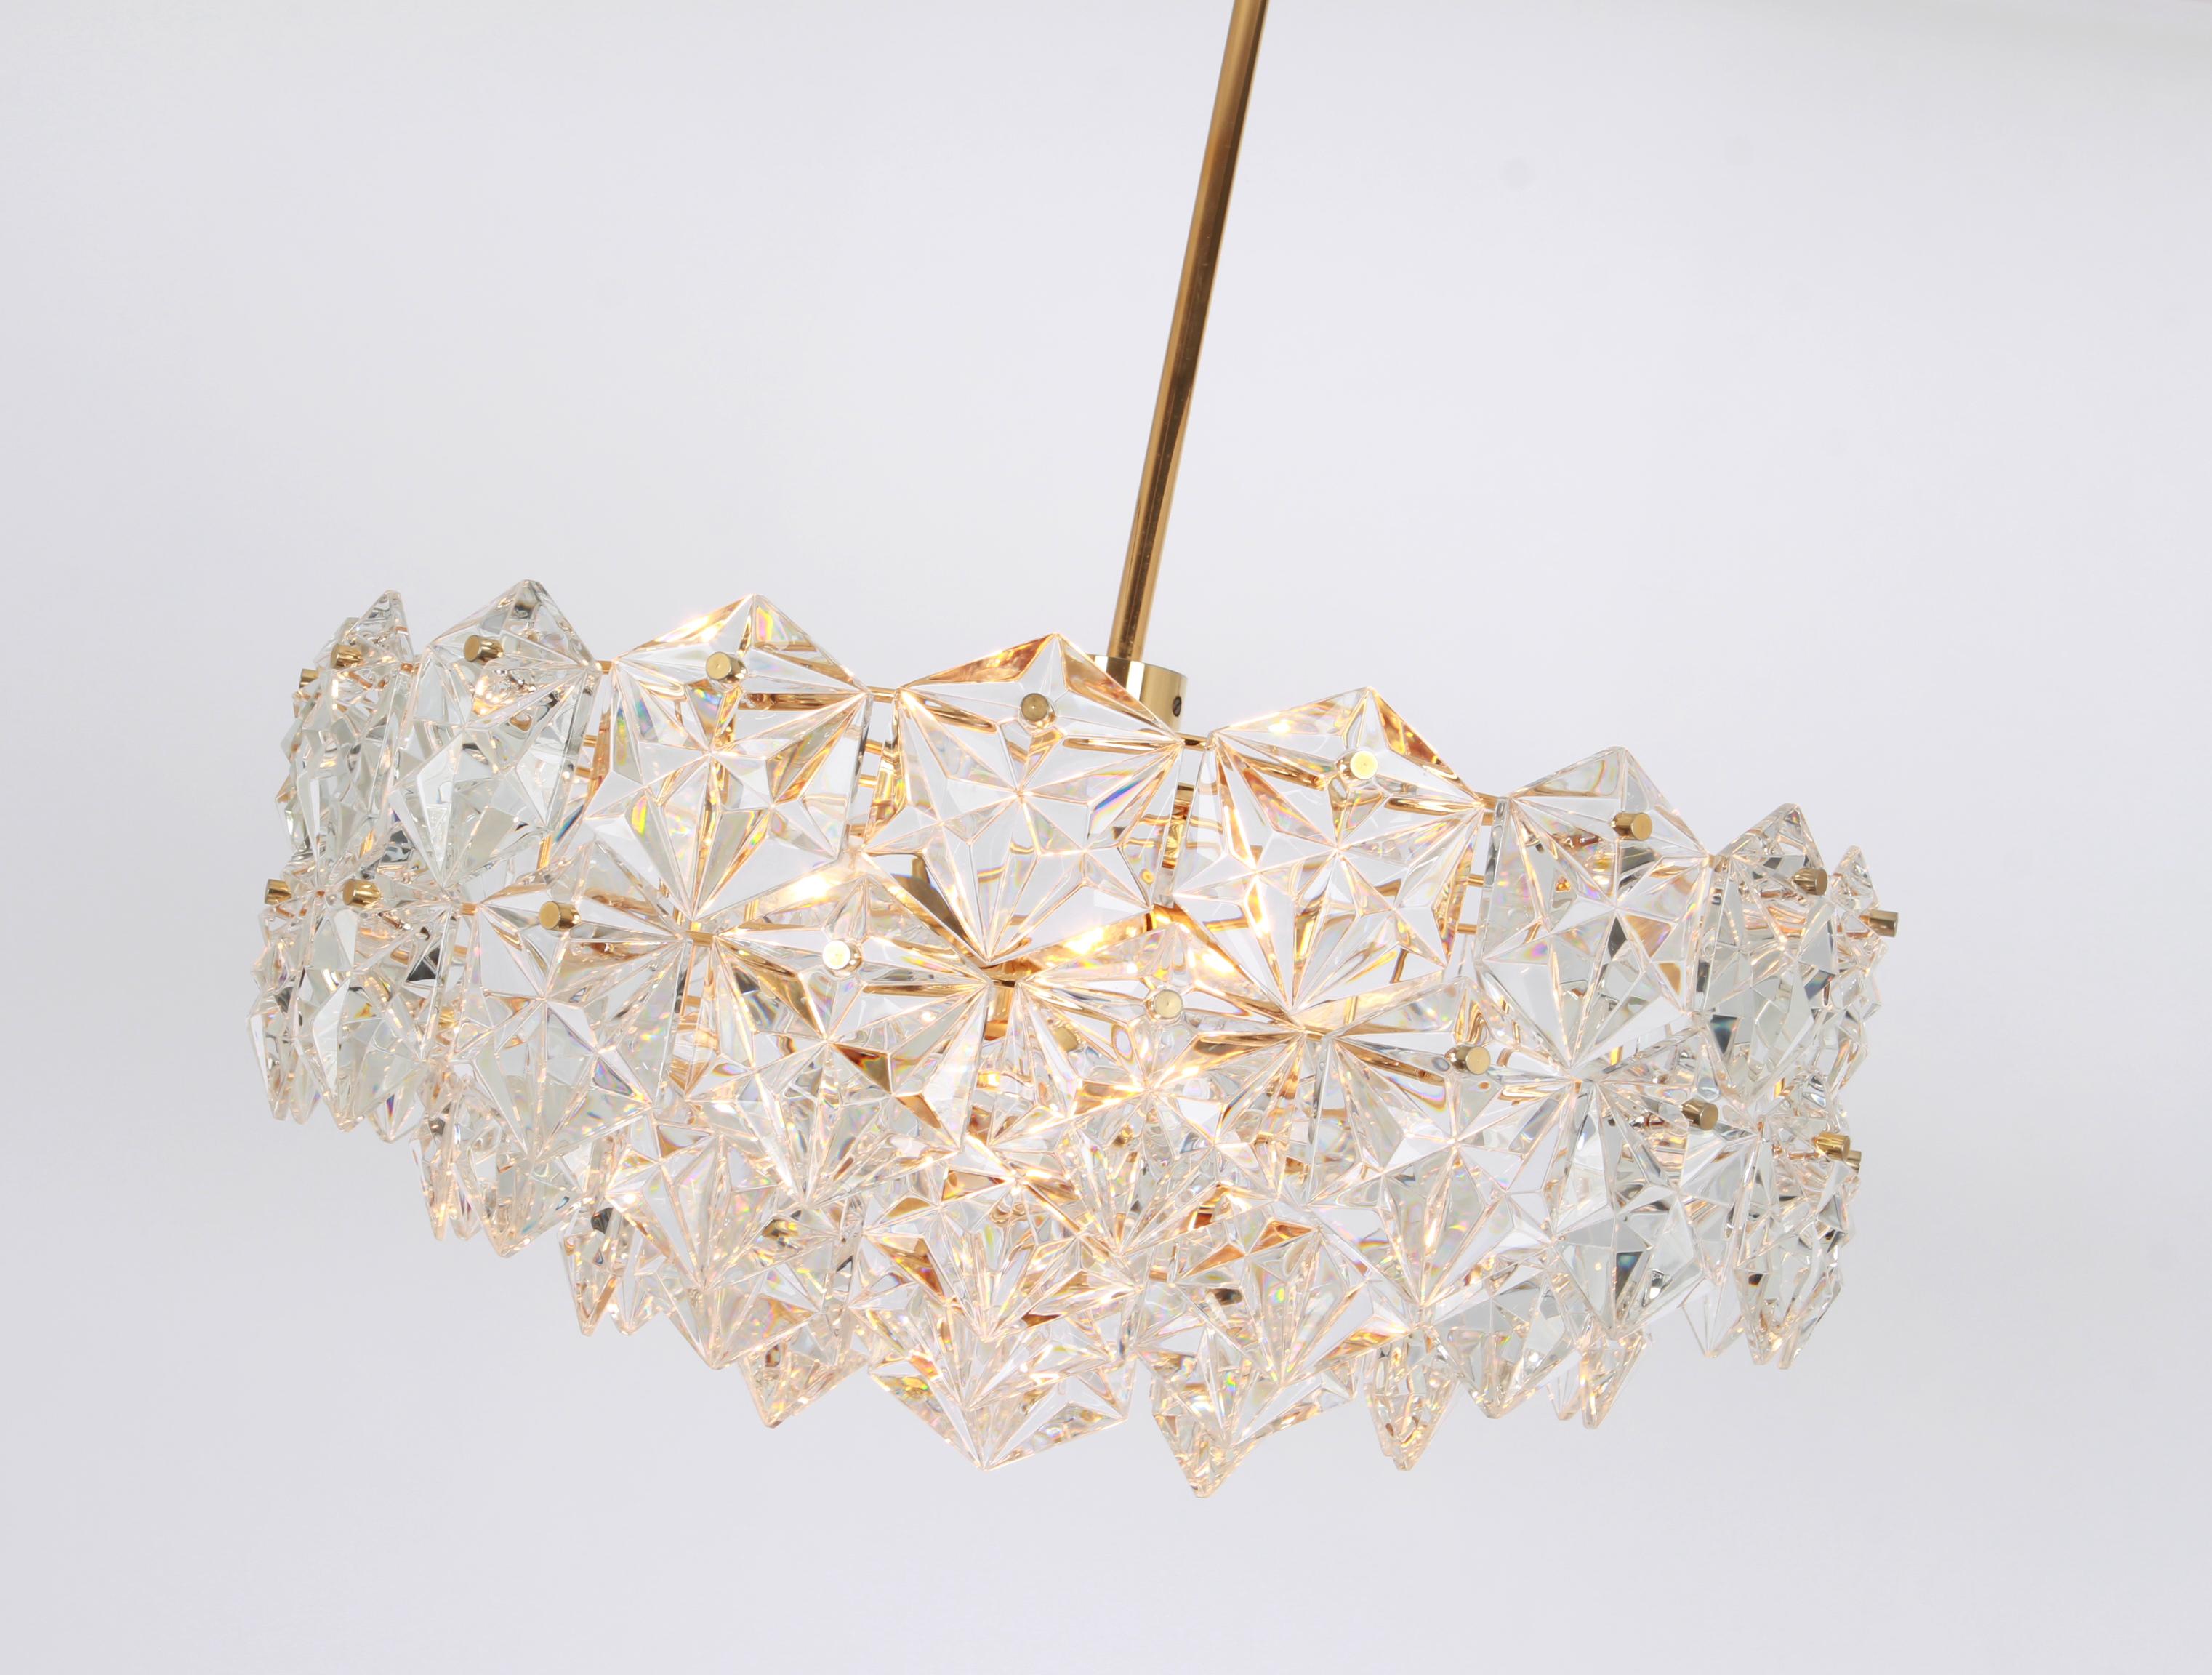 A stunning five-tier chandelier by Kinkeldey, Germany, manufactured in circa 1970-1979. A handmade and high-quality piece. The chandelier features a 24-karat gold-plated four-tier structure with lots of facetted crystal glass elements.

High